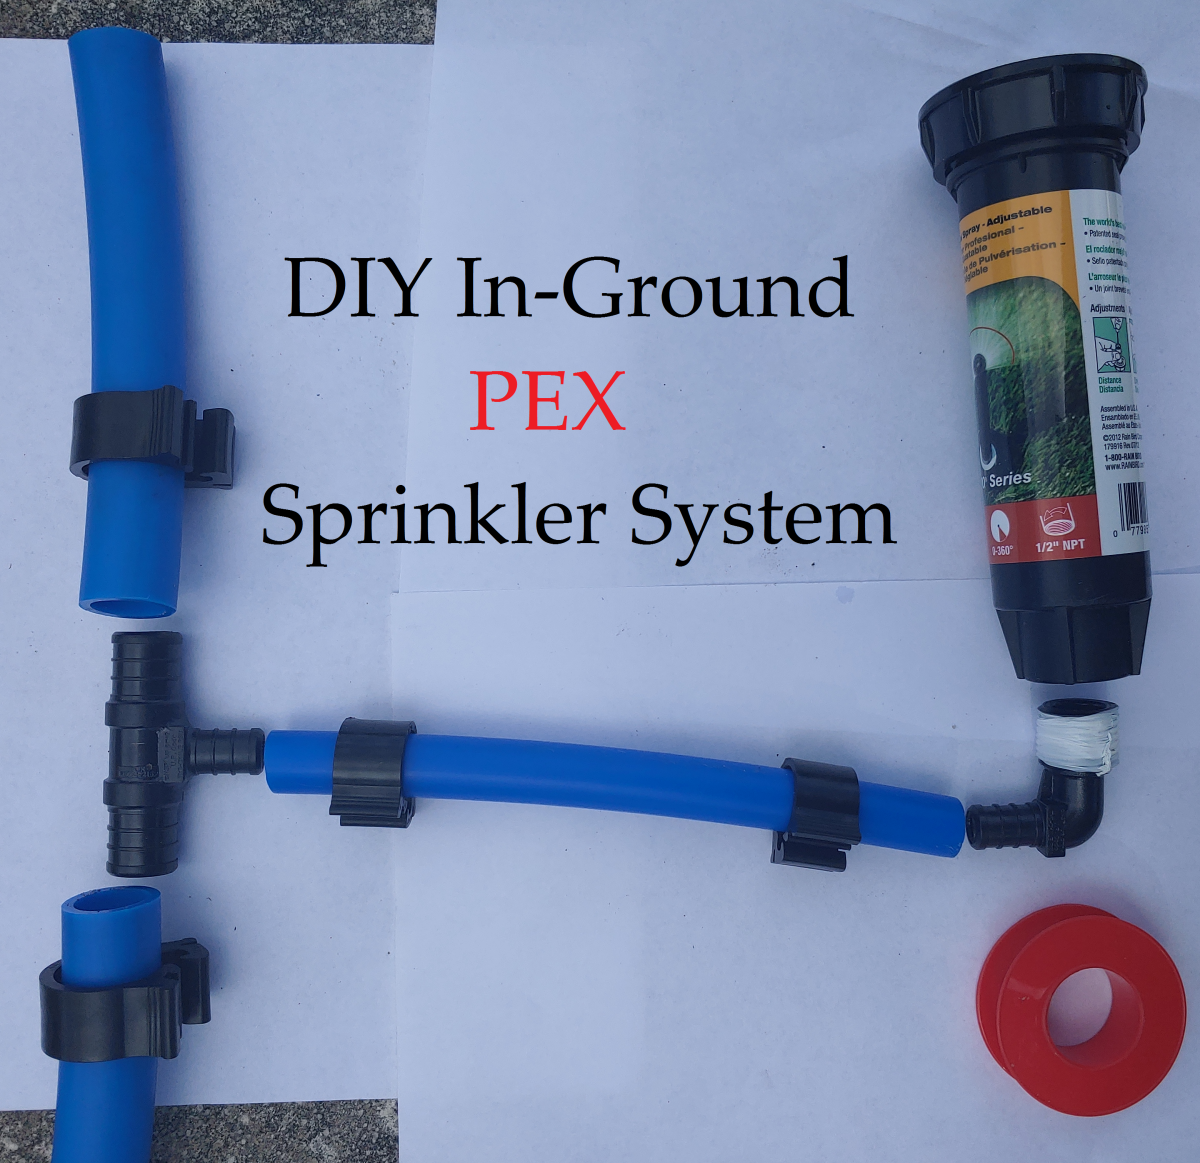 How to Install a DIY PEX Pop-Up Lawn and Garden Sprinkler System